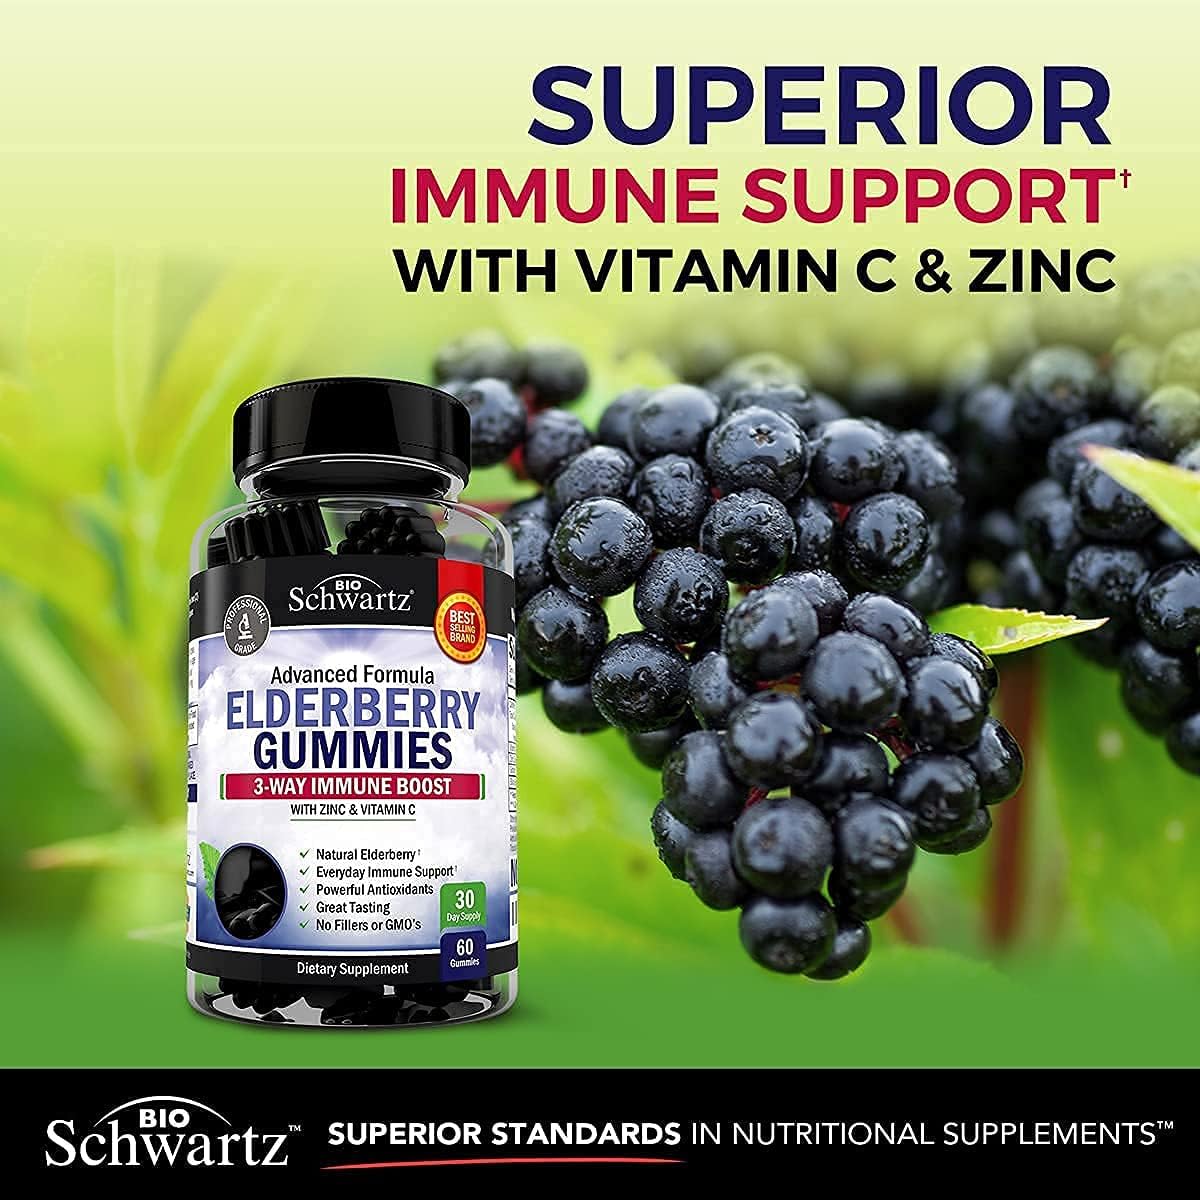 Elderberry Gummies With Zinc And Vitamin C For Adults  Kids - Natural Immune Support - Black Sambucus Elderberries - Powerful Multiminerals Supplement - Gluten-Free, Non-Gmo, Made In Usa, 60 Ct